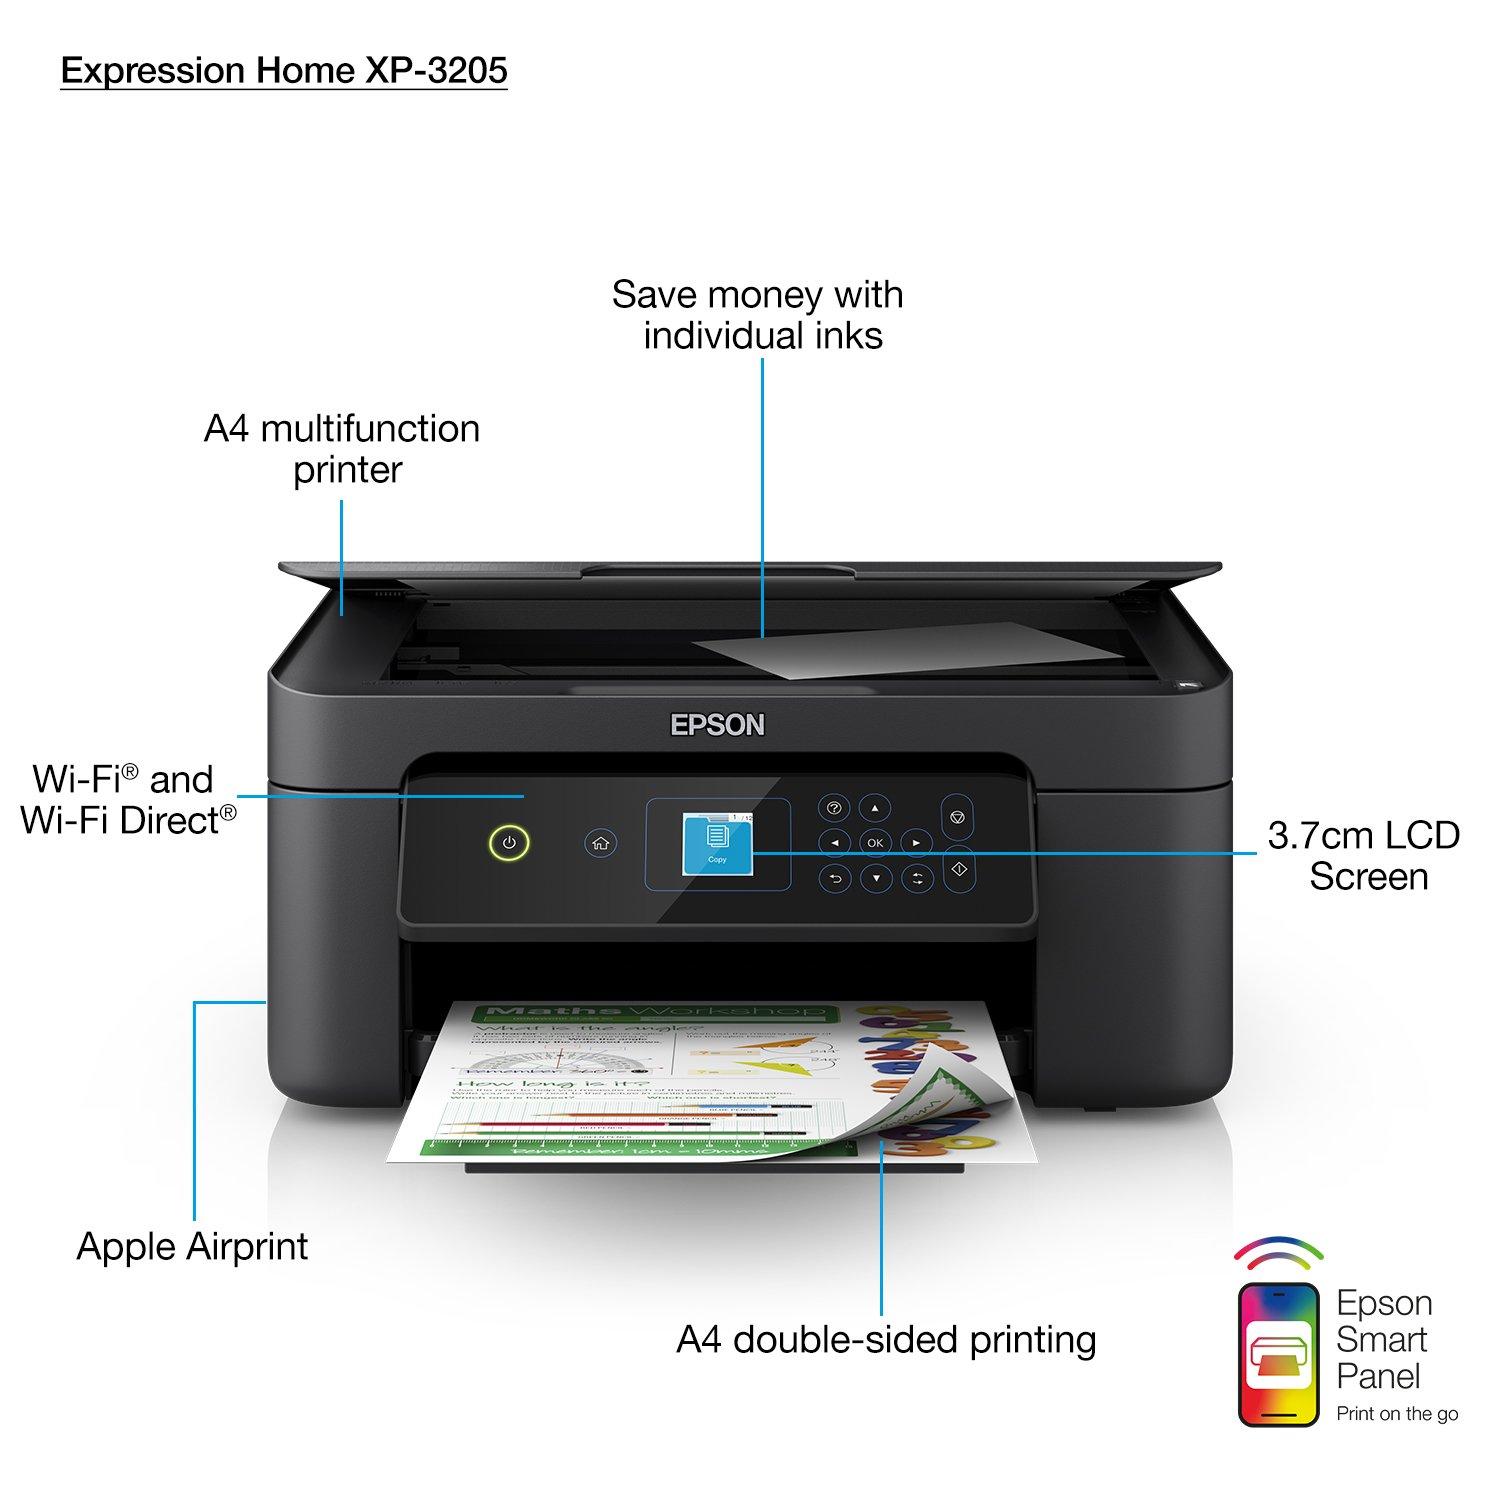 Printers | | Consumer XP-3205 Inkjet Europe | Epson Products Printers | | Expression Home